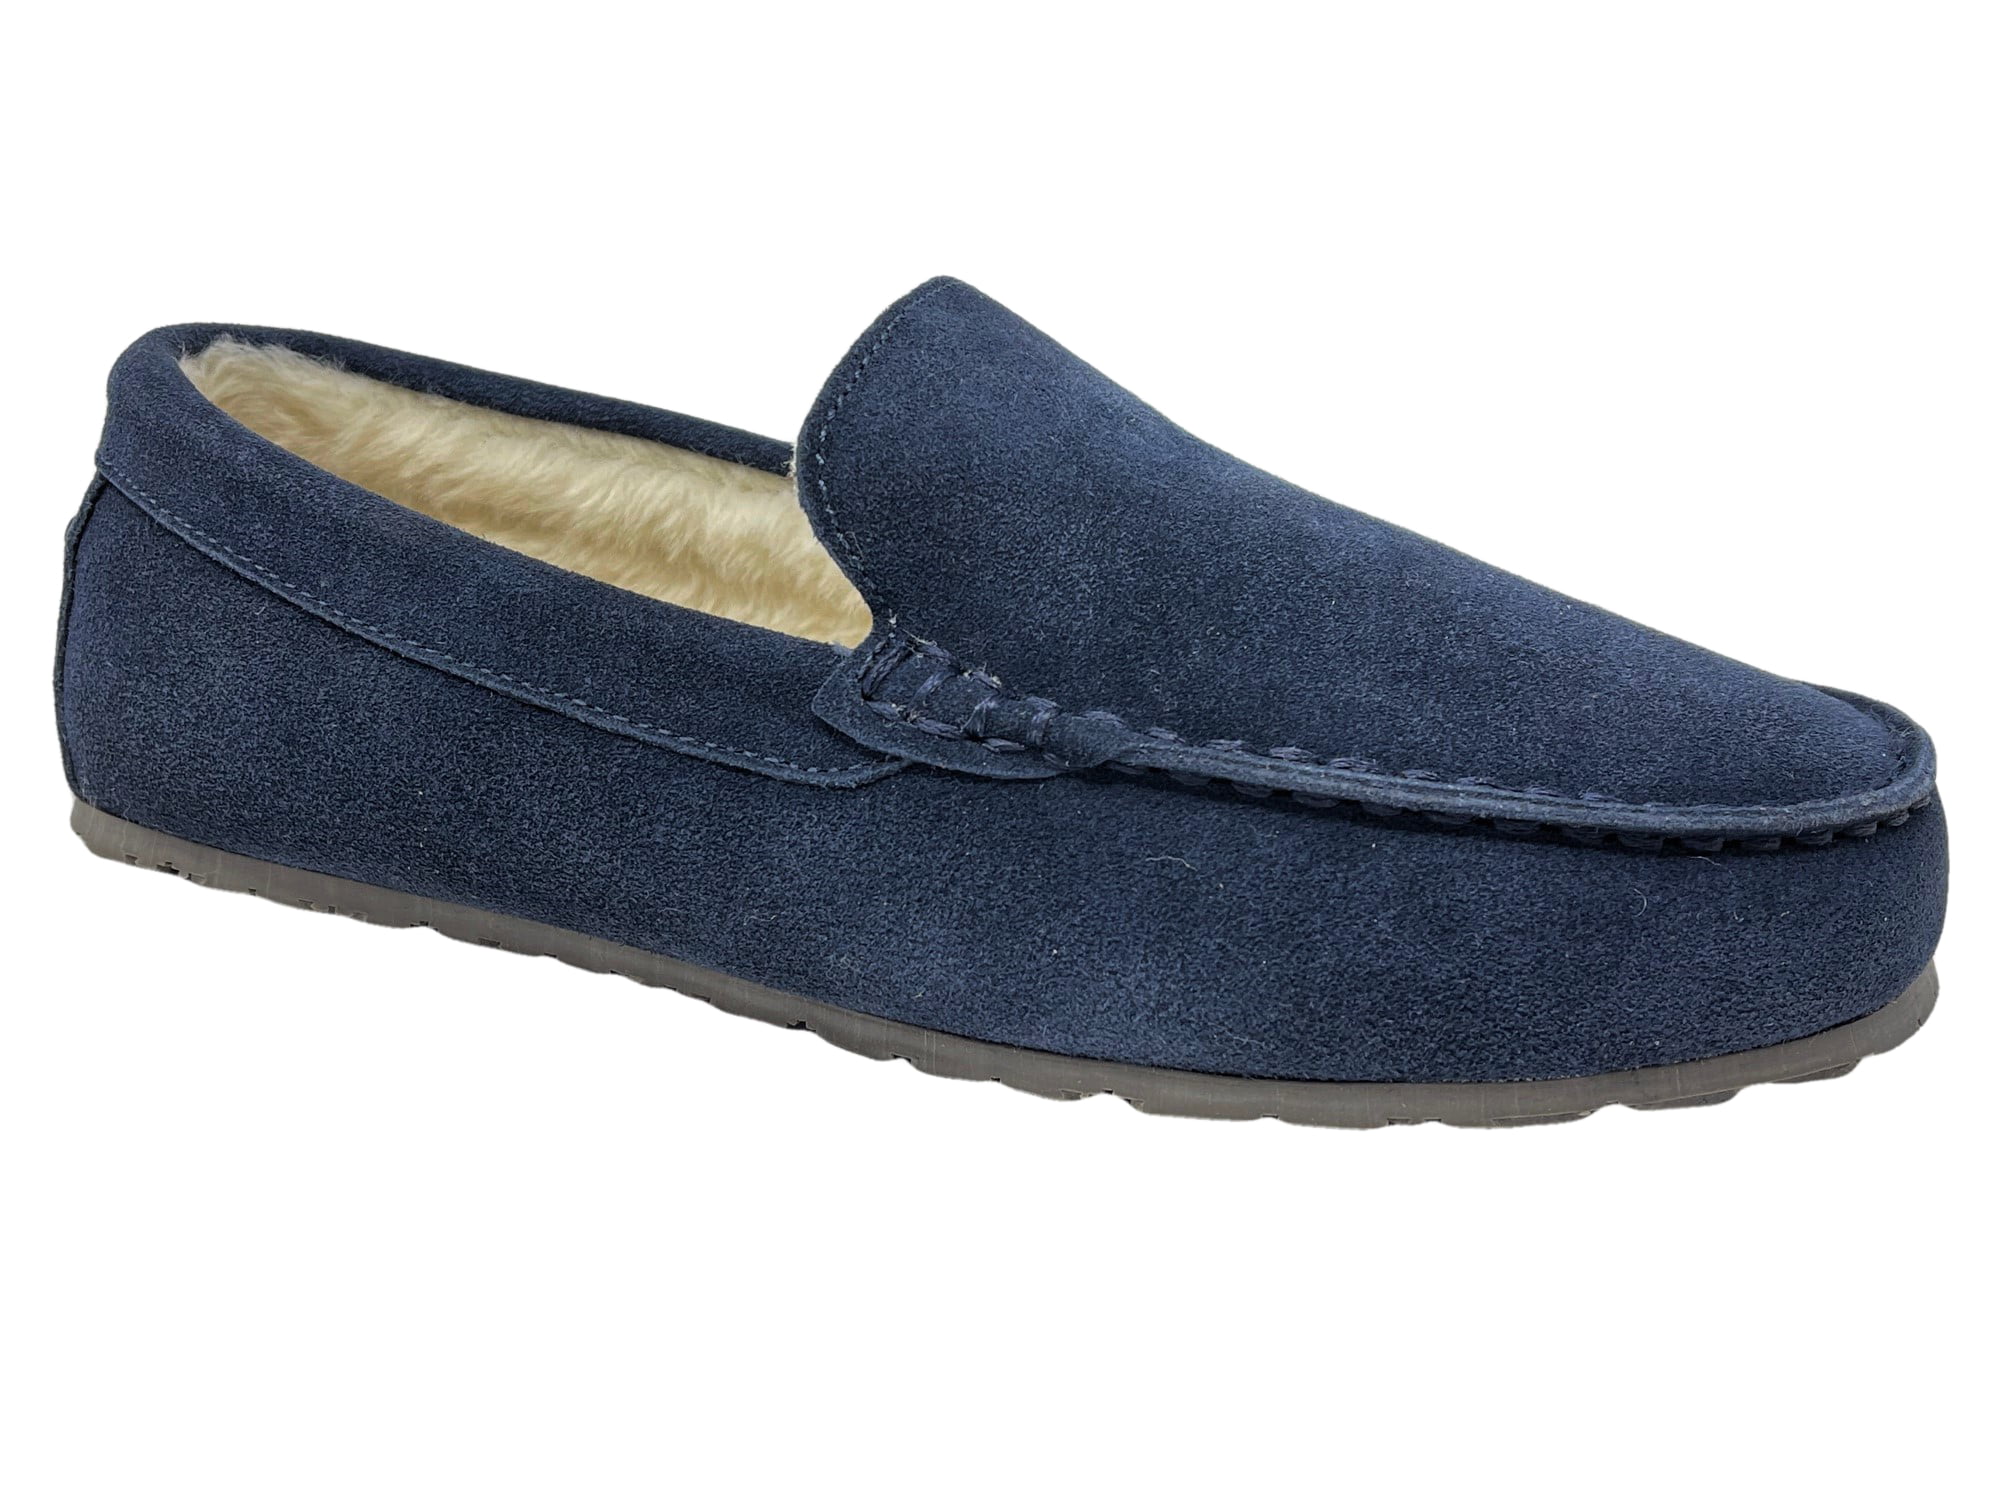 MENS CLARKS SLIPPERS SLIP ON CASUAL FUR LINED COMFY SLIPPERS SHOES KITE FALCON